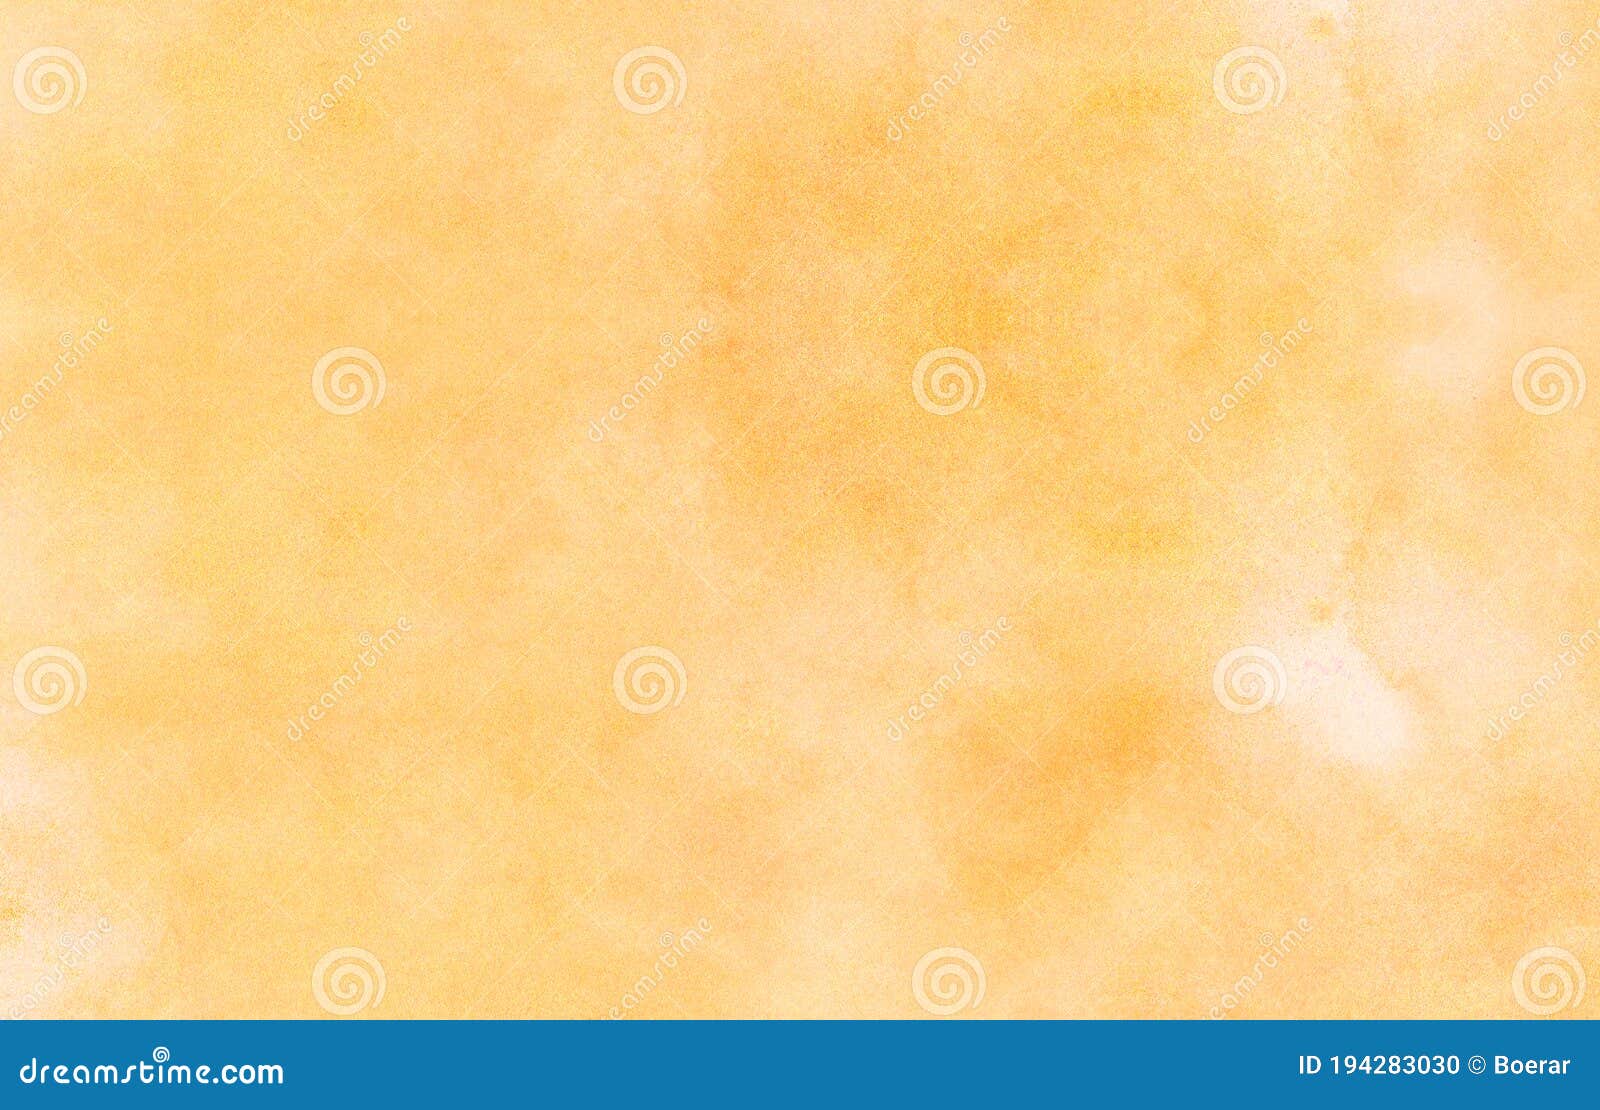 Light Orange Shades And Yellow Color Watercolor Background Bright Aquarelle Paint Paper Texture Canvas Element For Retro Text Stock Photo Image Of Abstract Backdrop